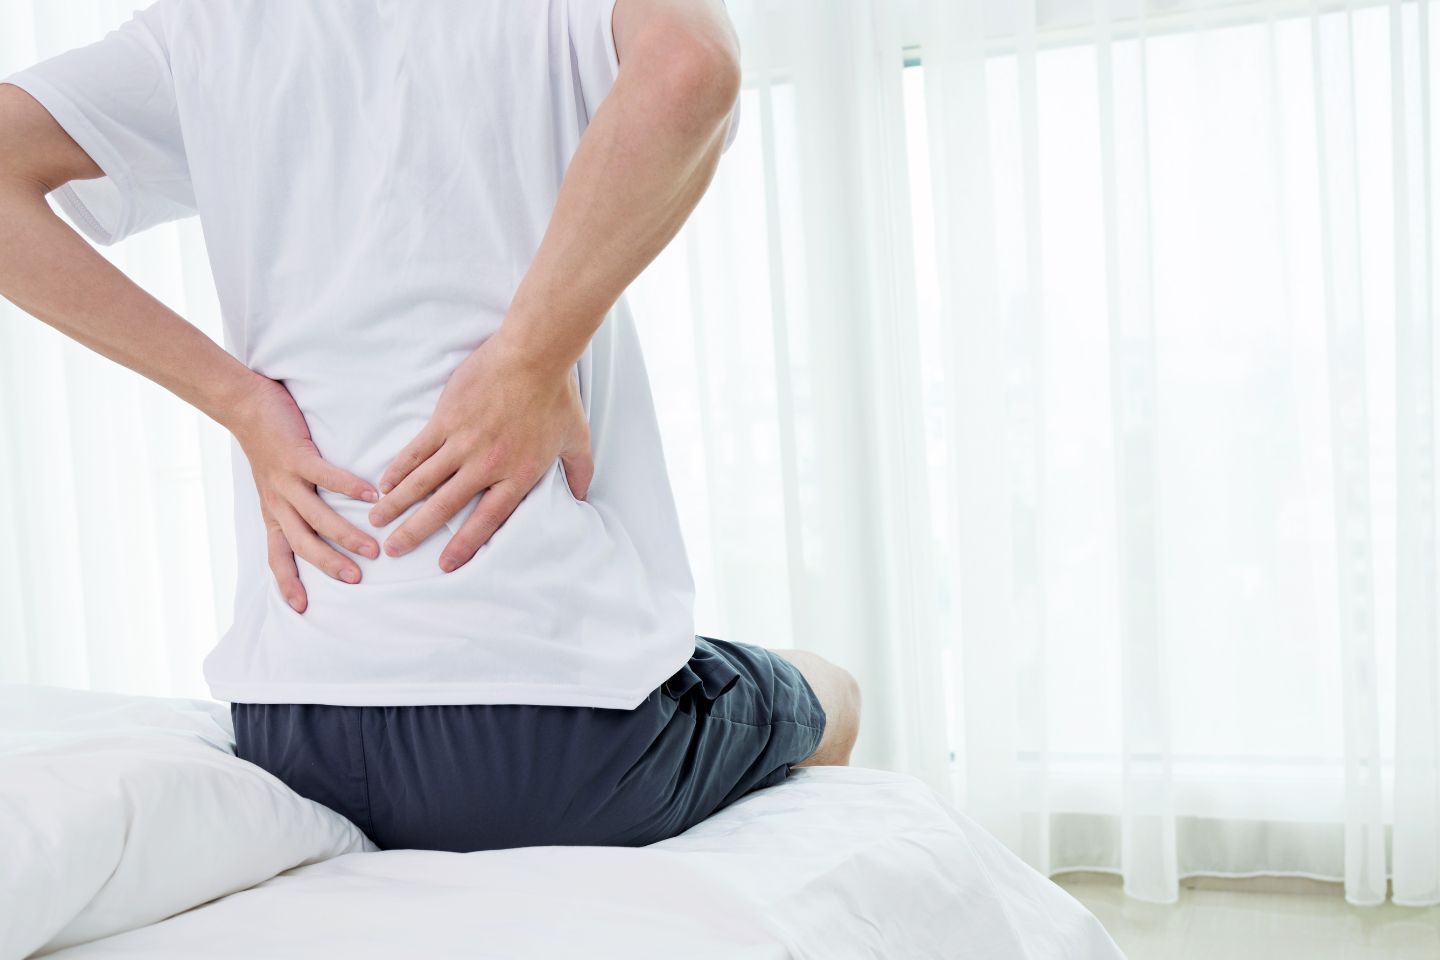 5 Tips to Help Relieve Middle Back Pain - Workvie